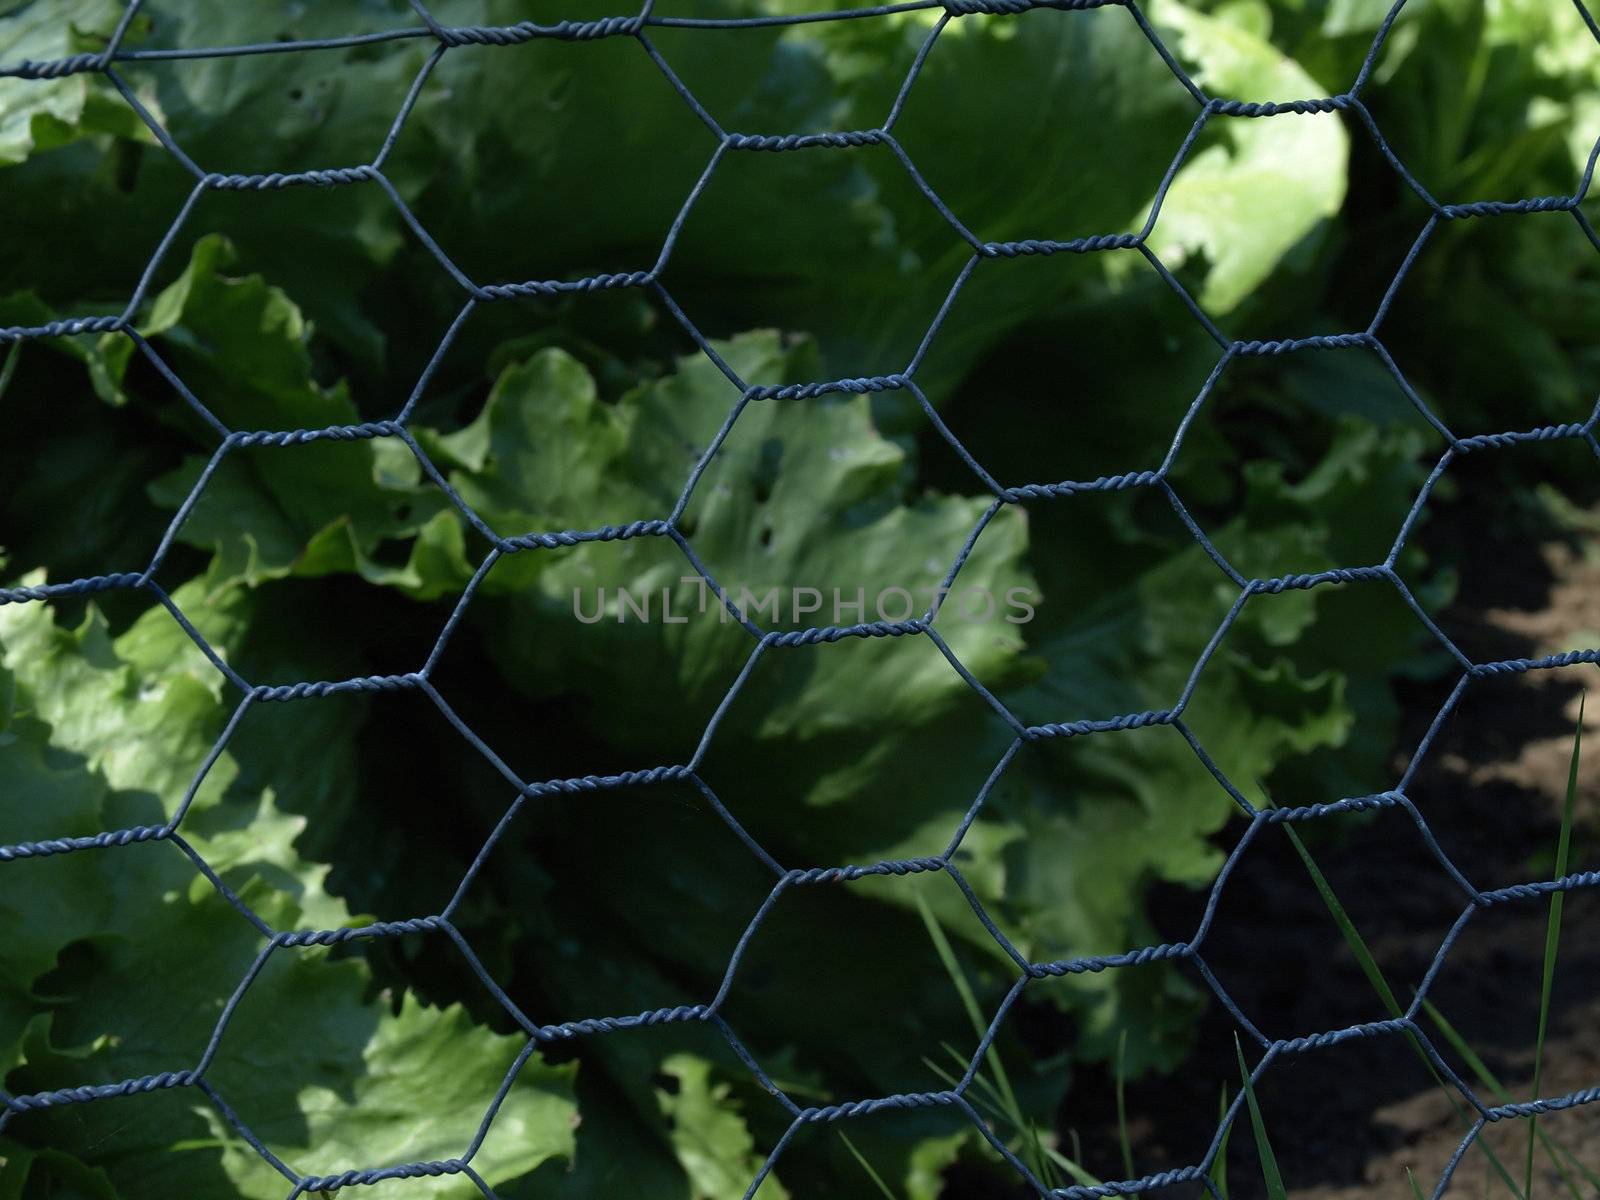 Hexagon shaped chicken wire surrounding a garden of green leafy vegetables.